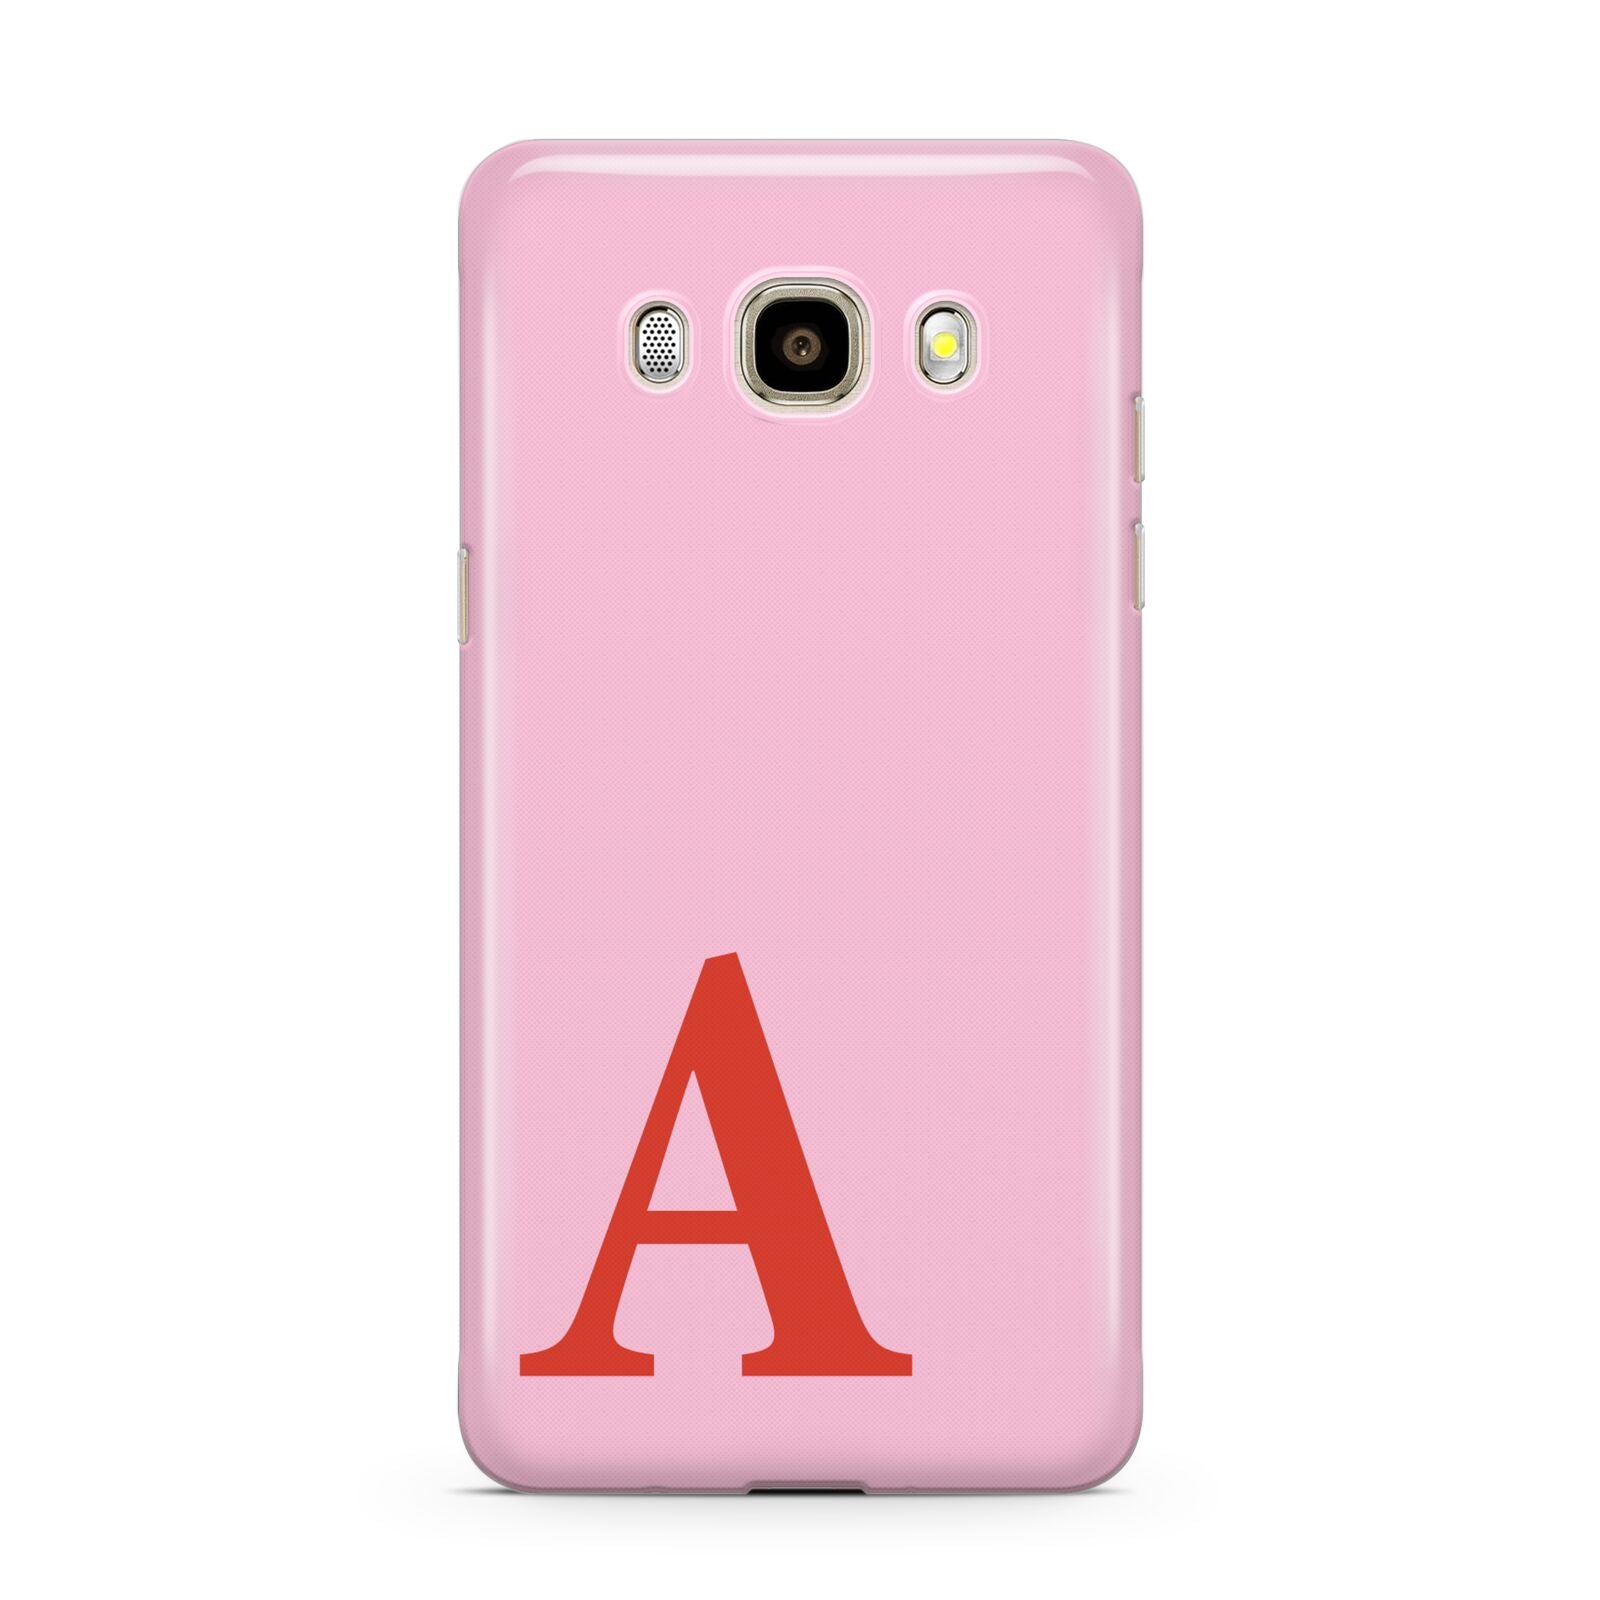 Personalised Pink and Red Samsung Galaxy J7 2016 Case on gold phone